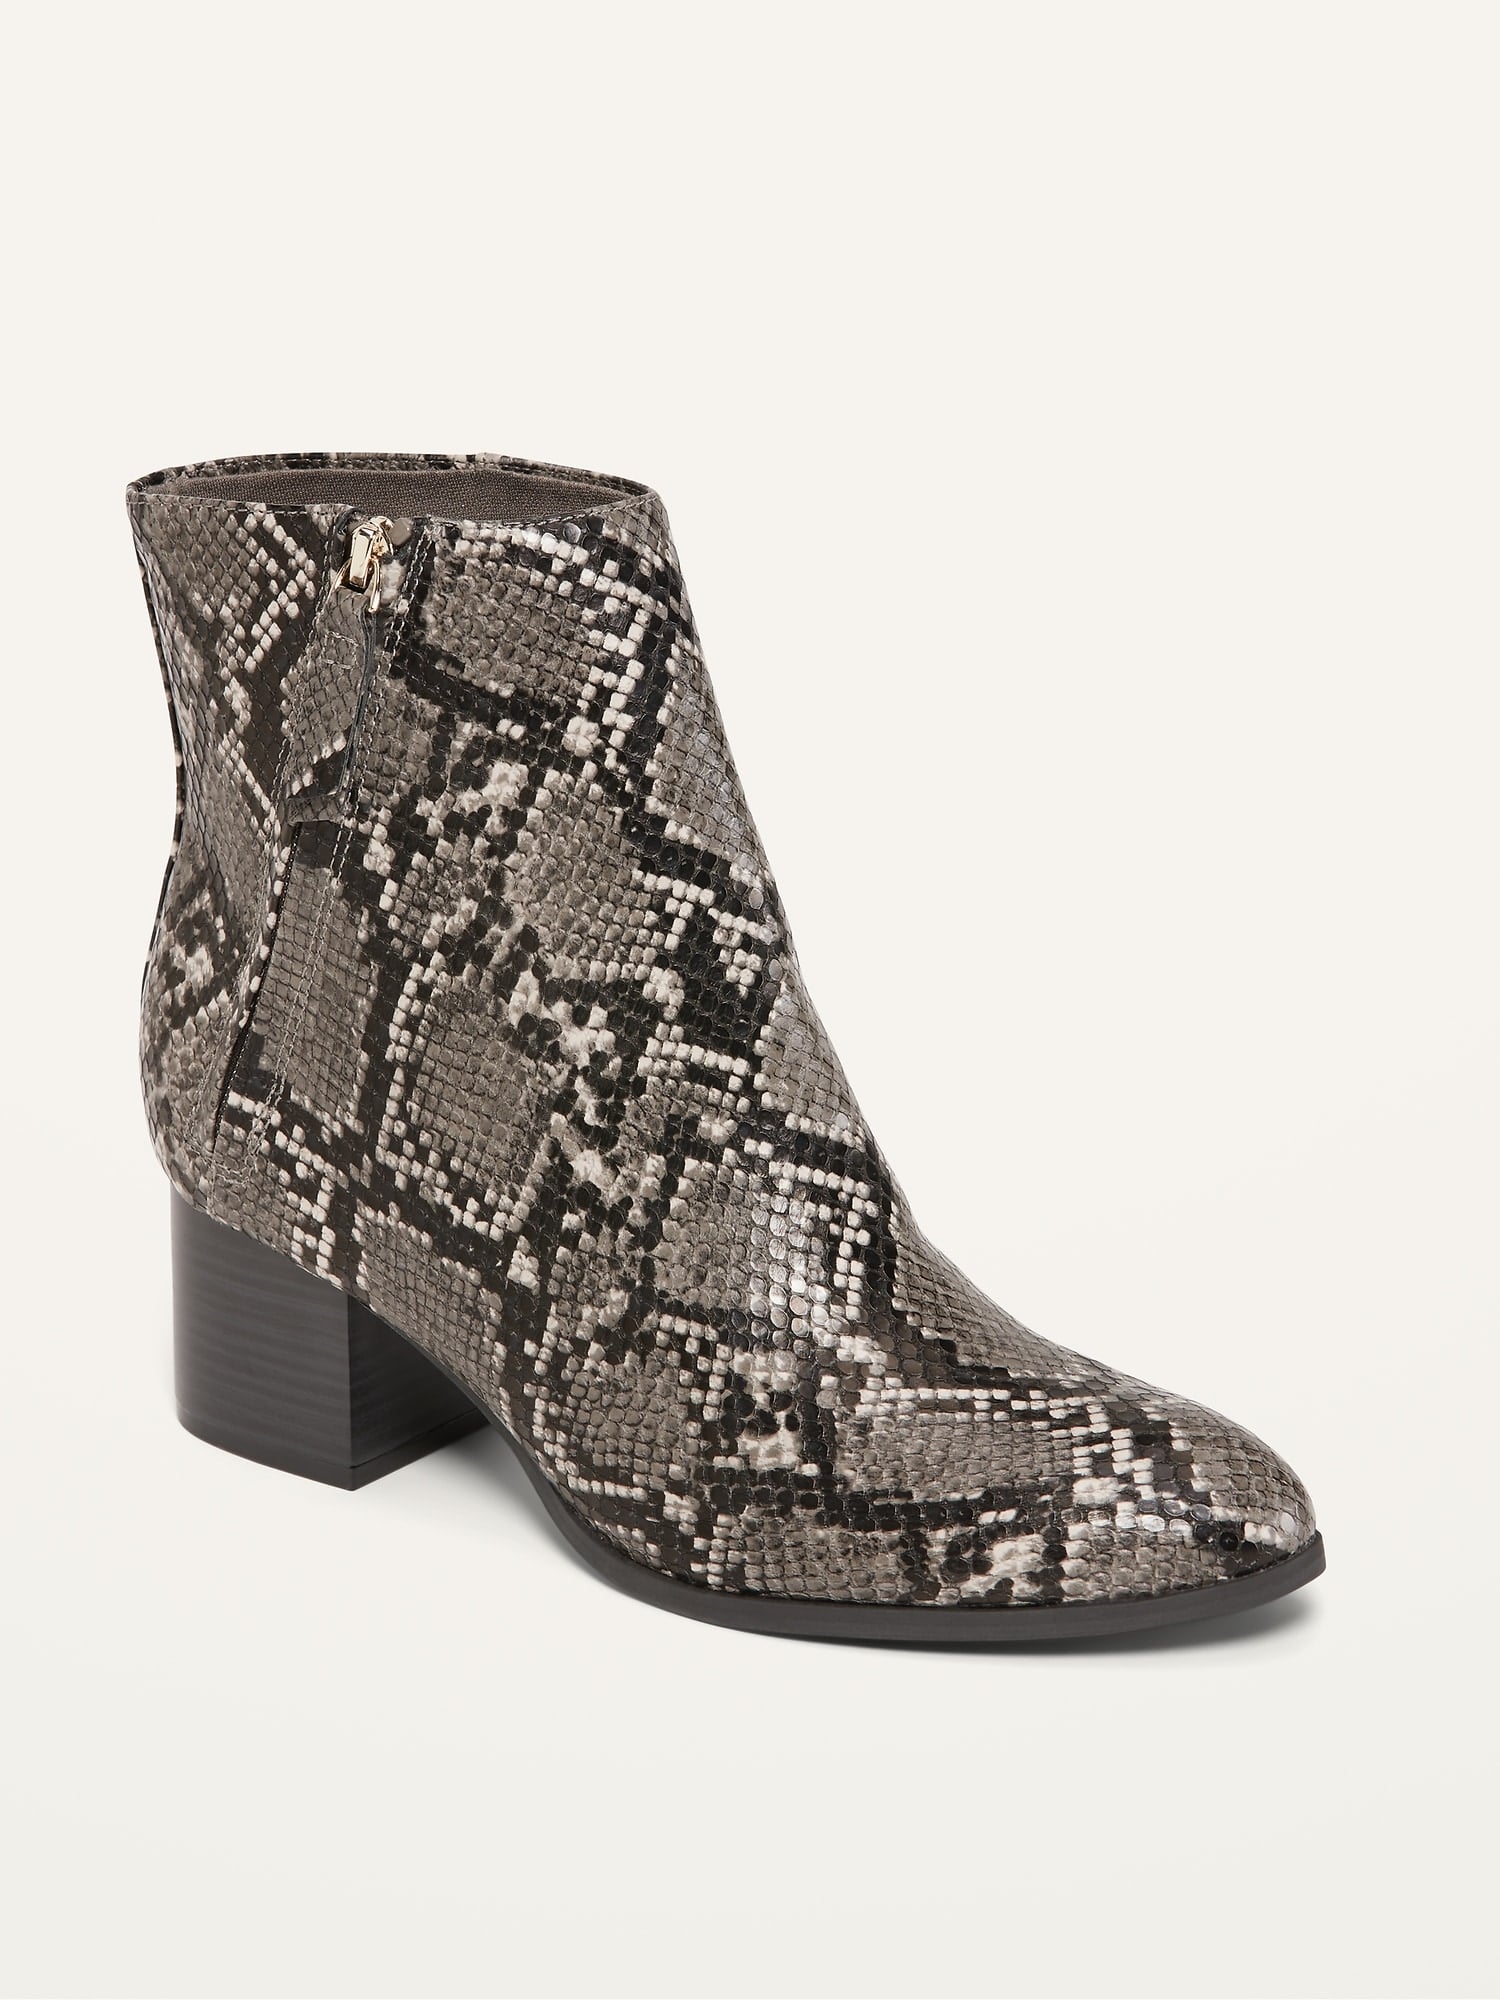 Cheap Snakeskin Boots For Women at Old 